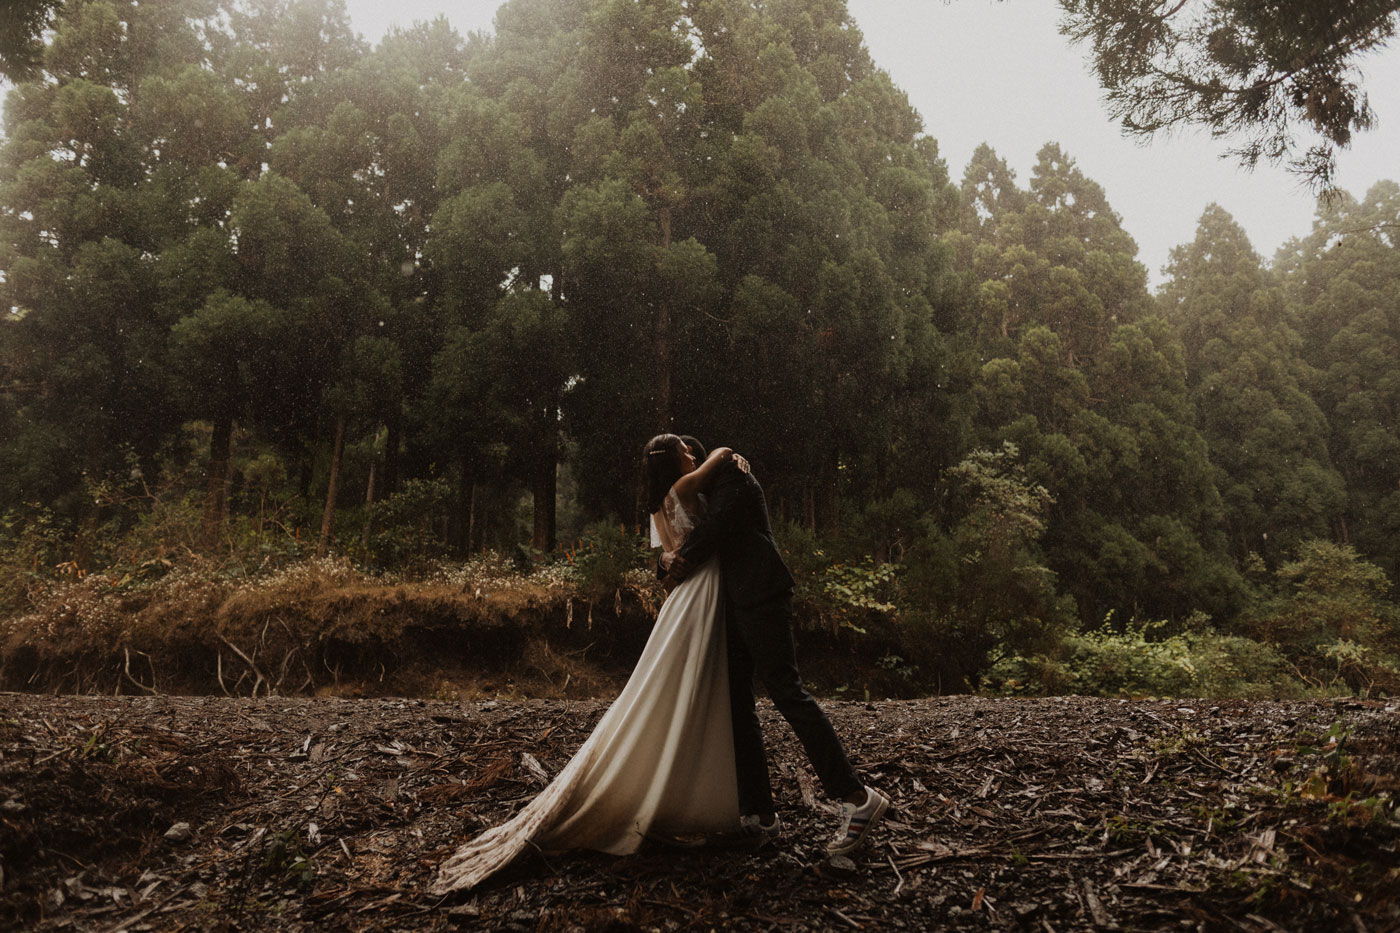 Rainy Trash the Dress in the forest